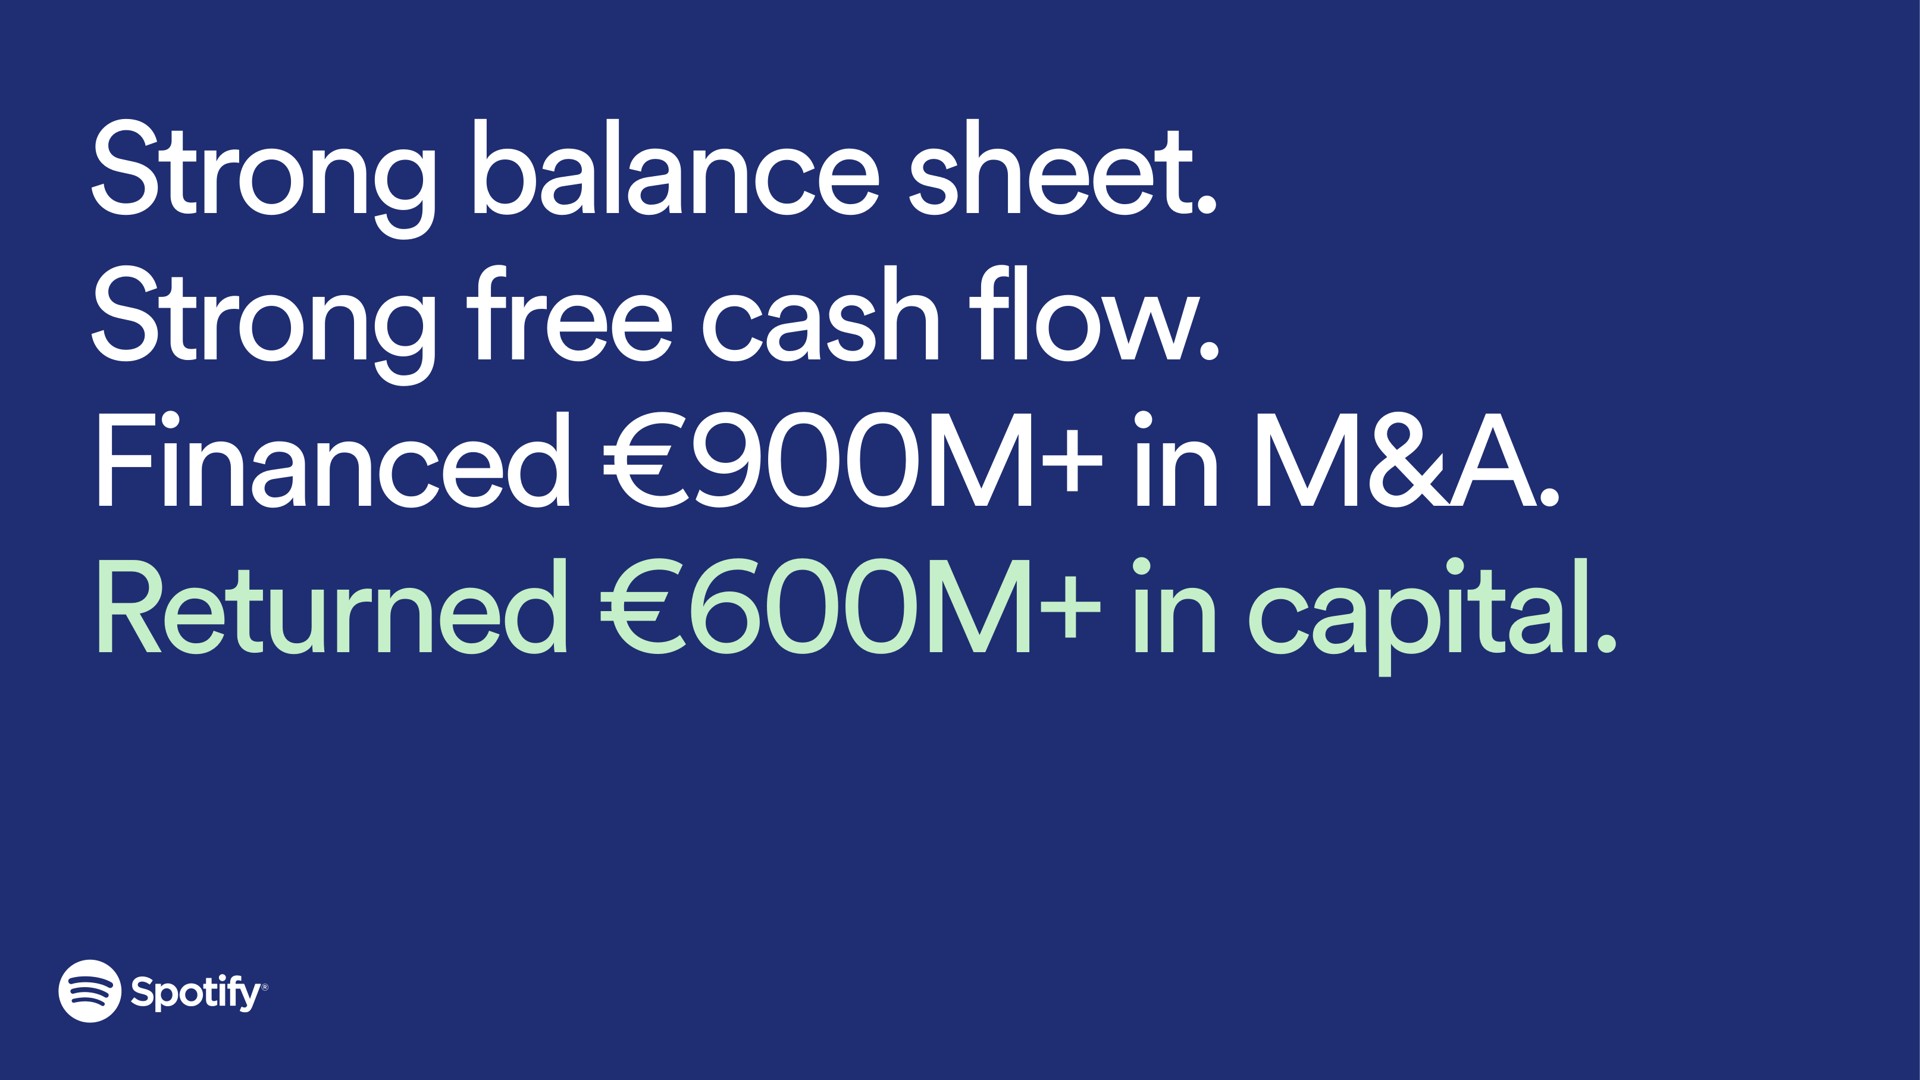 strong balance sheet strong free cash flow financed in a returned in capital | Spotify